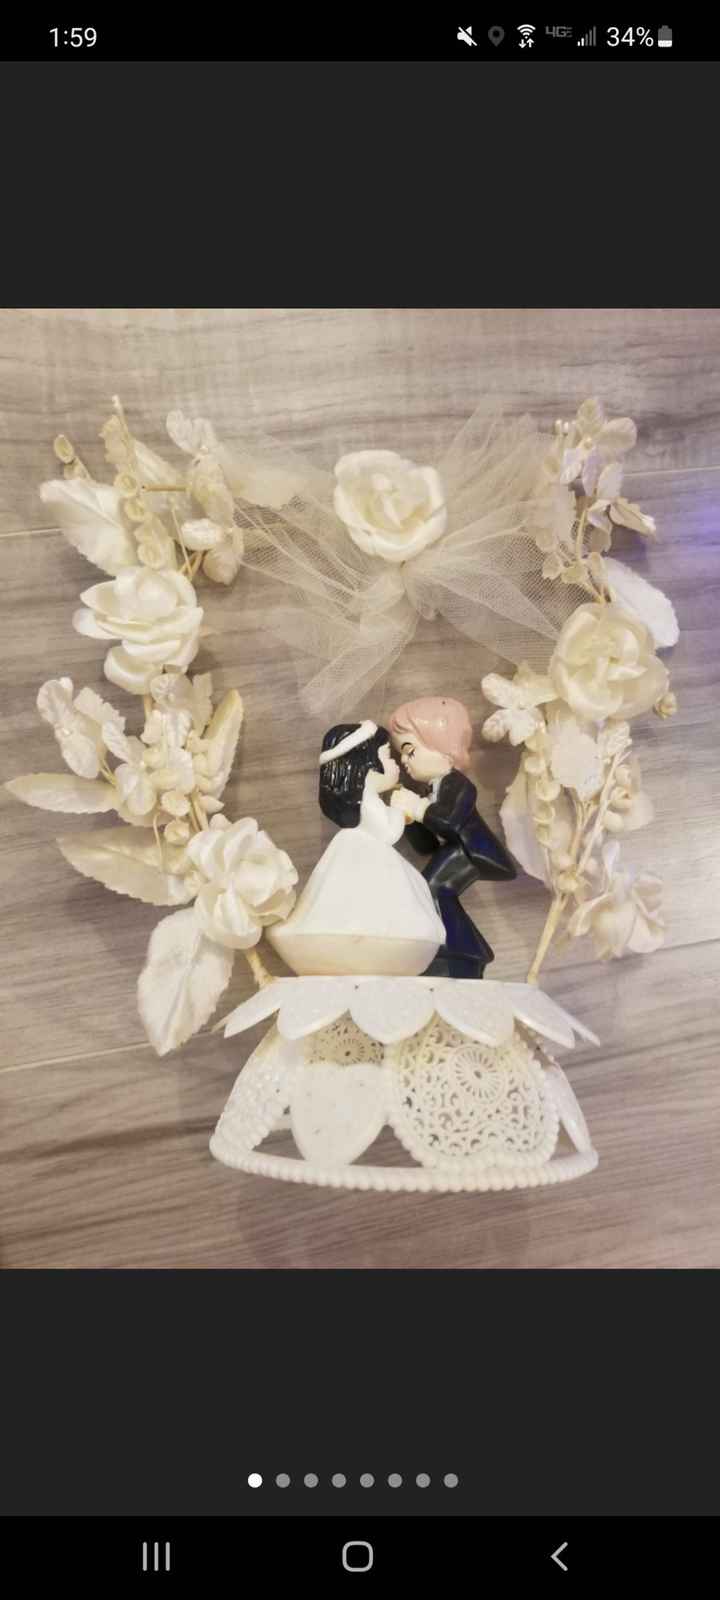 Show Off Your Cake Toppers! - 1